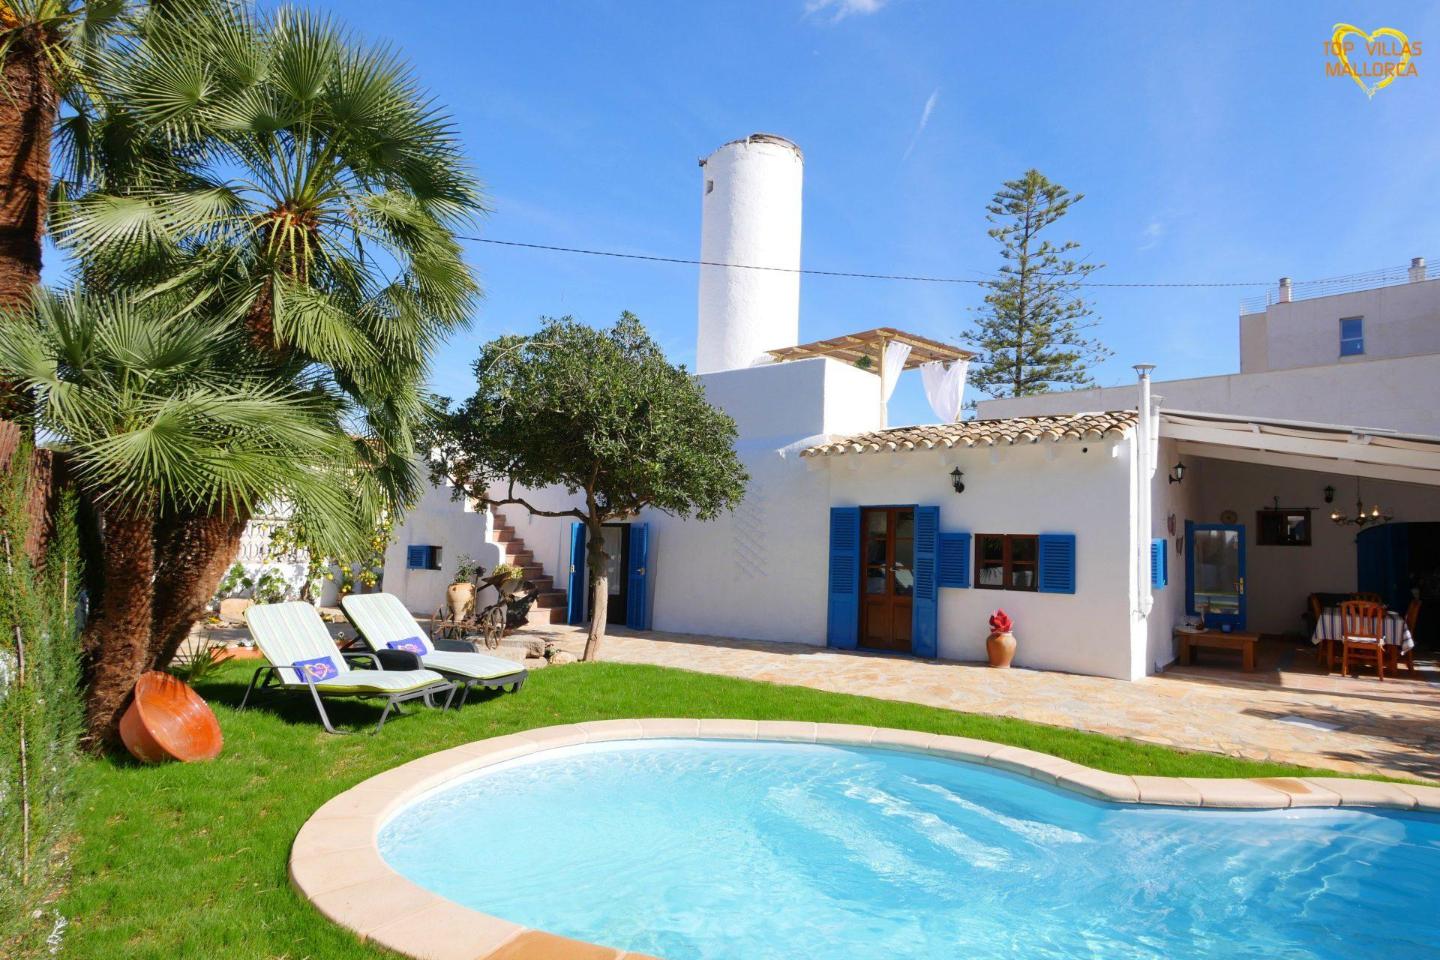 Historical house for rent in Mallorca